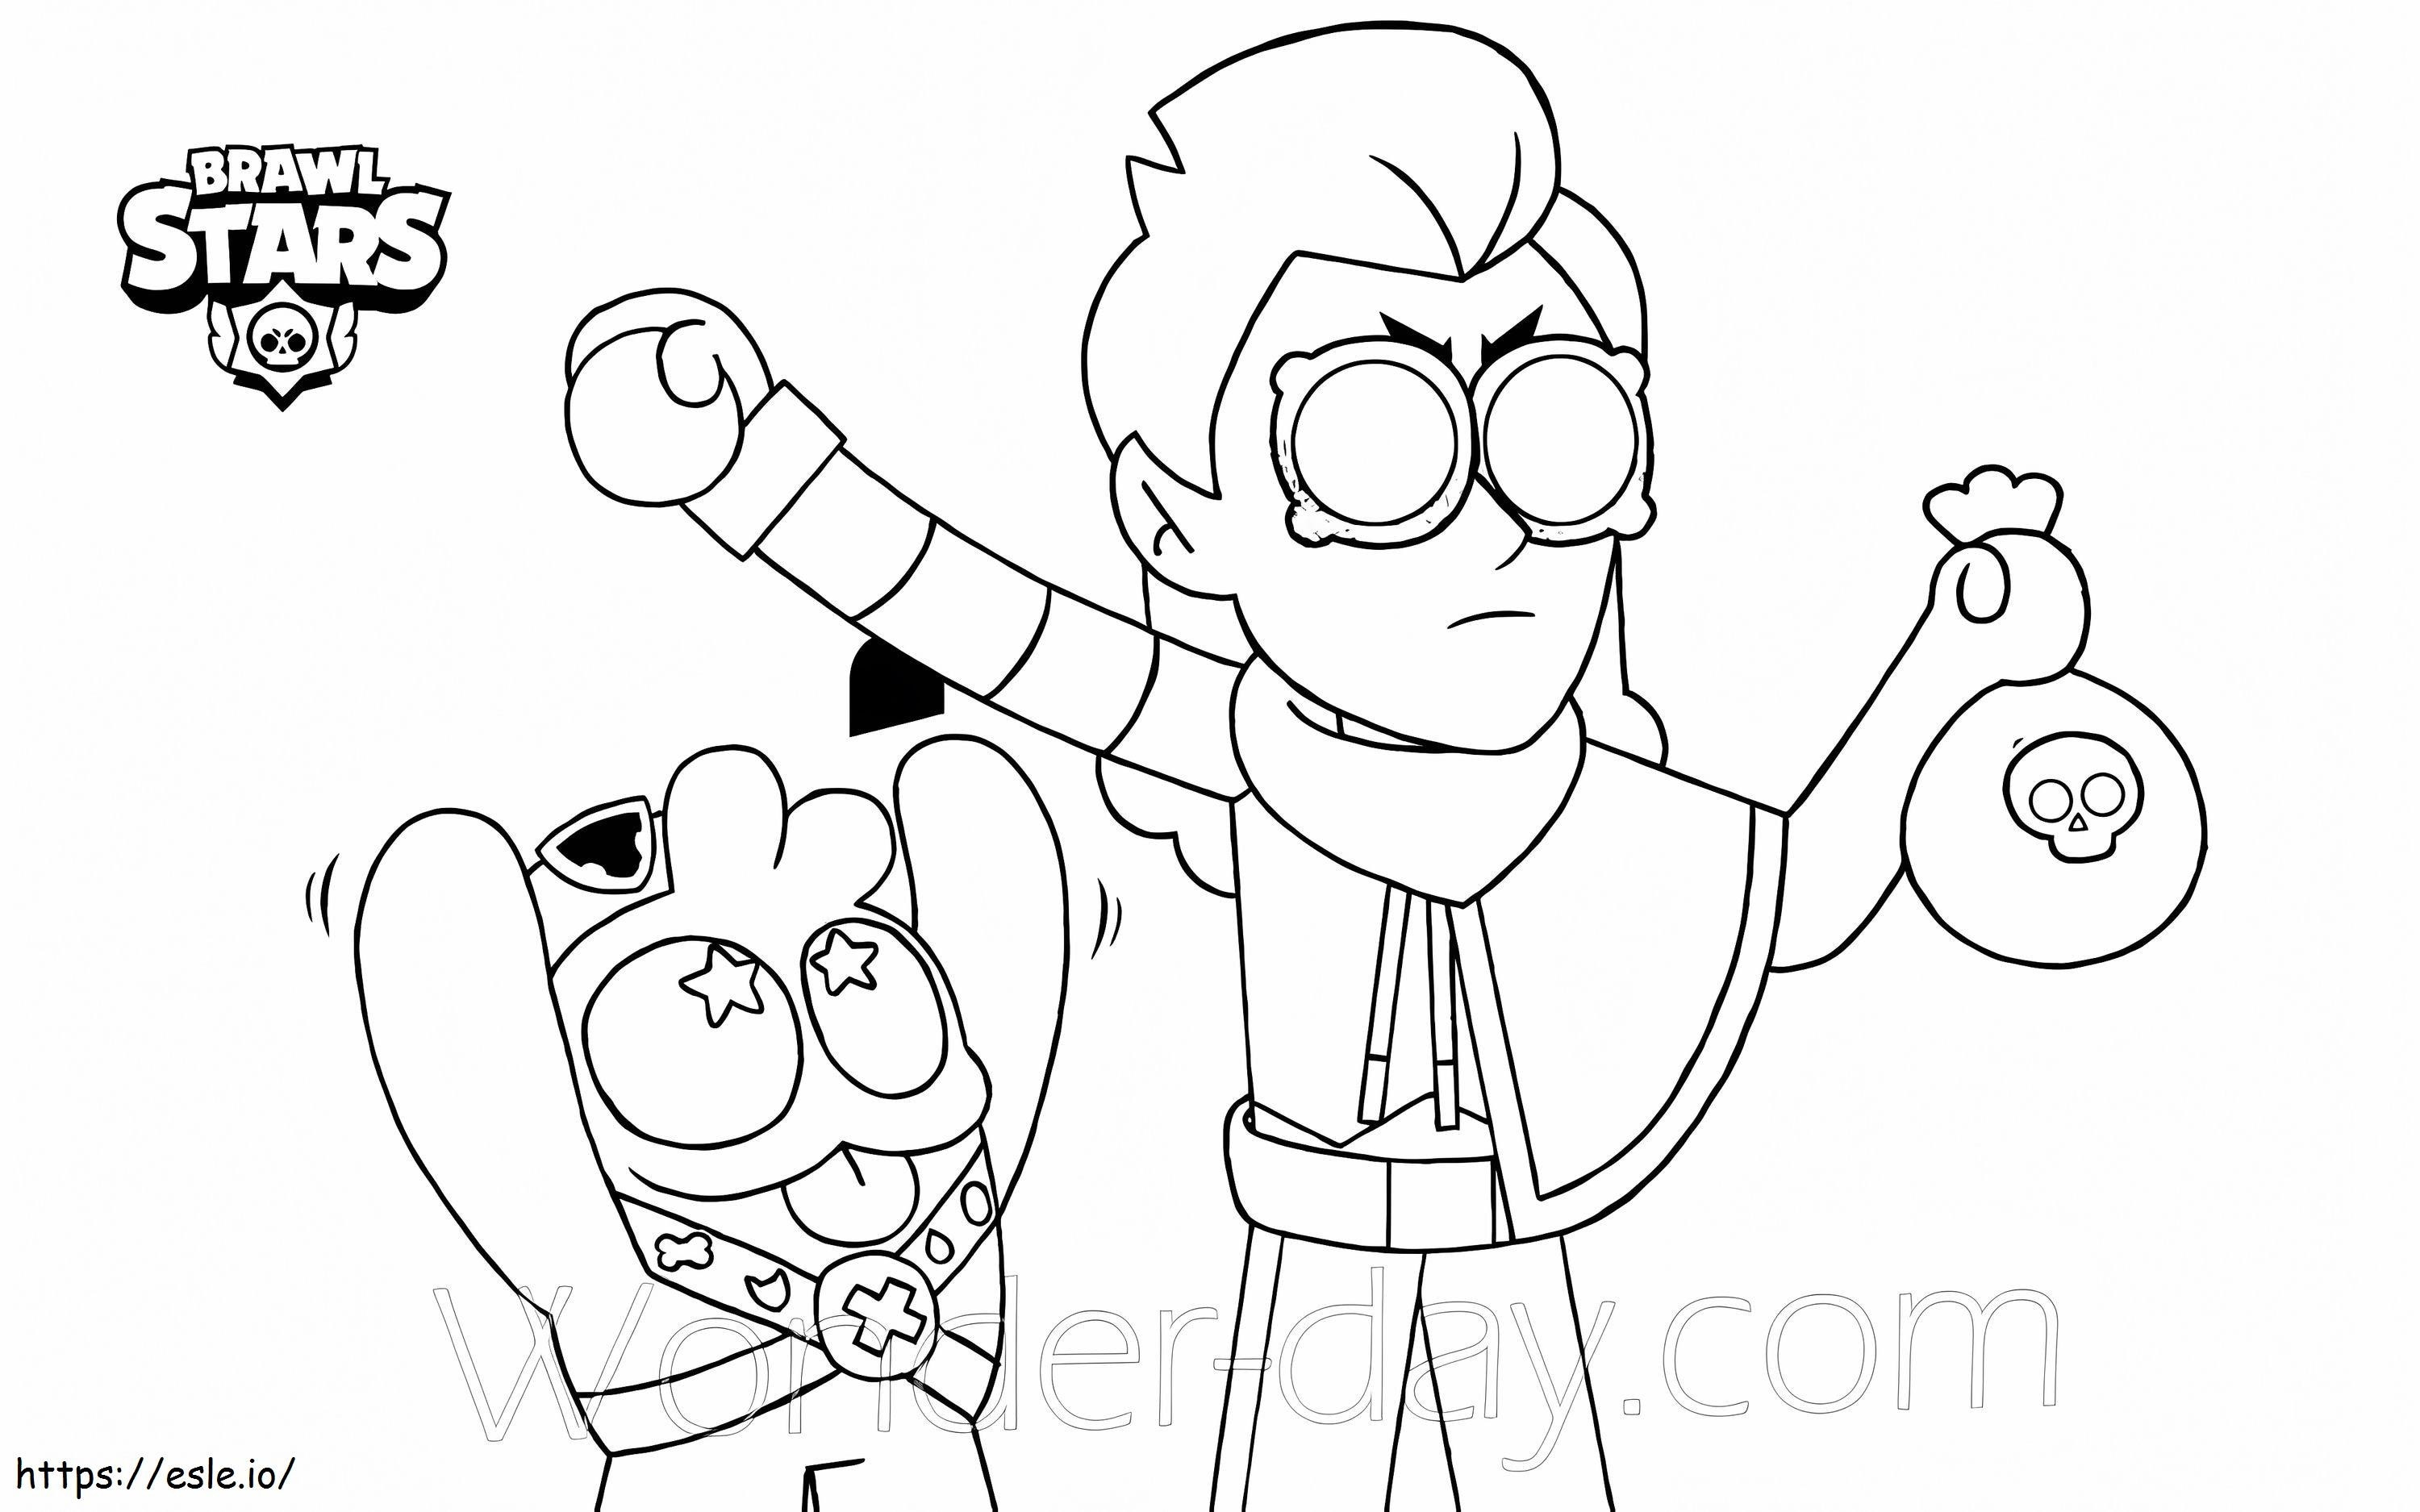 Squeak And Belle coloring page